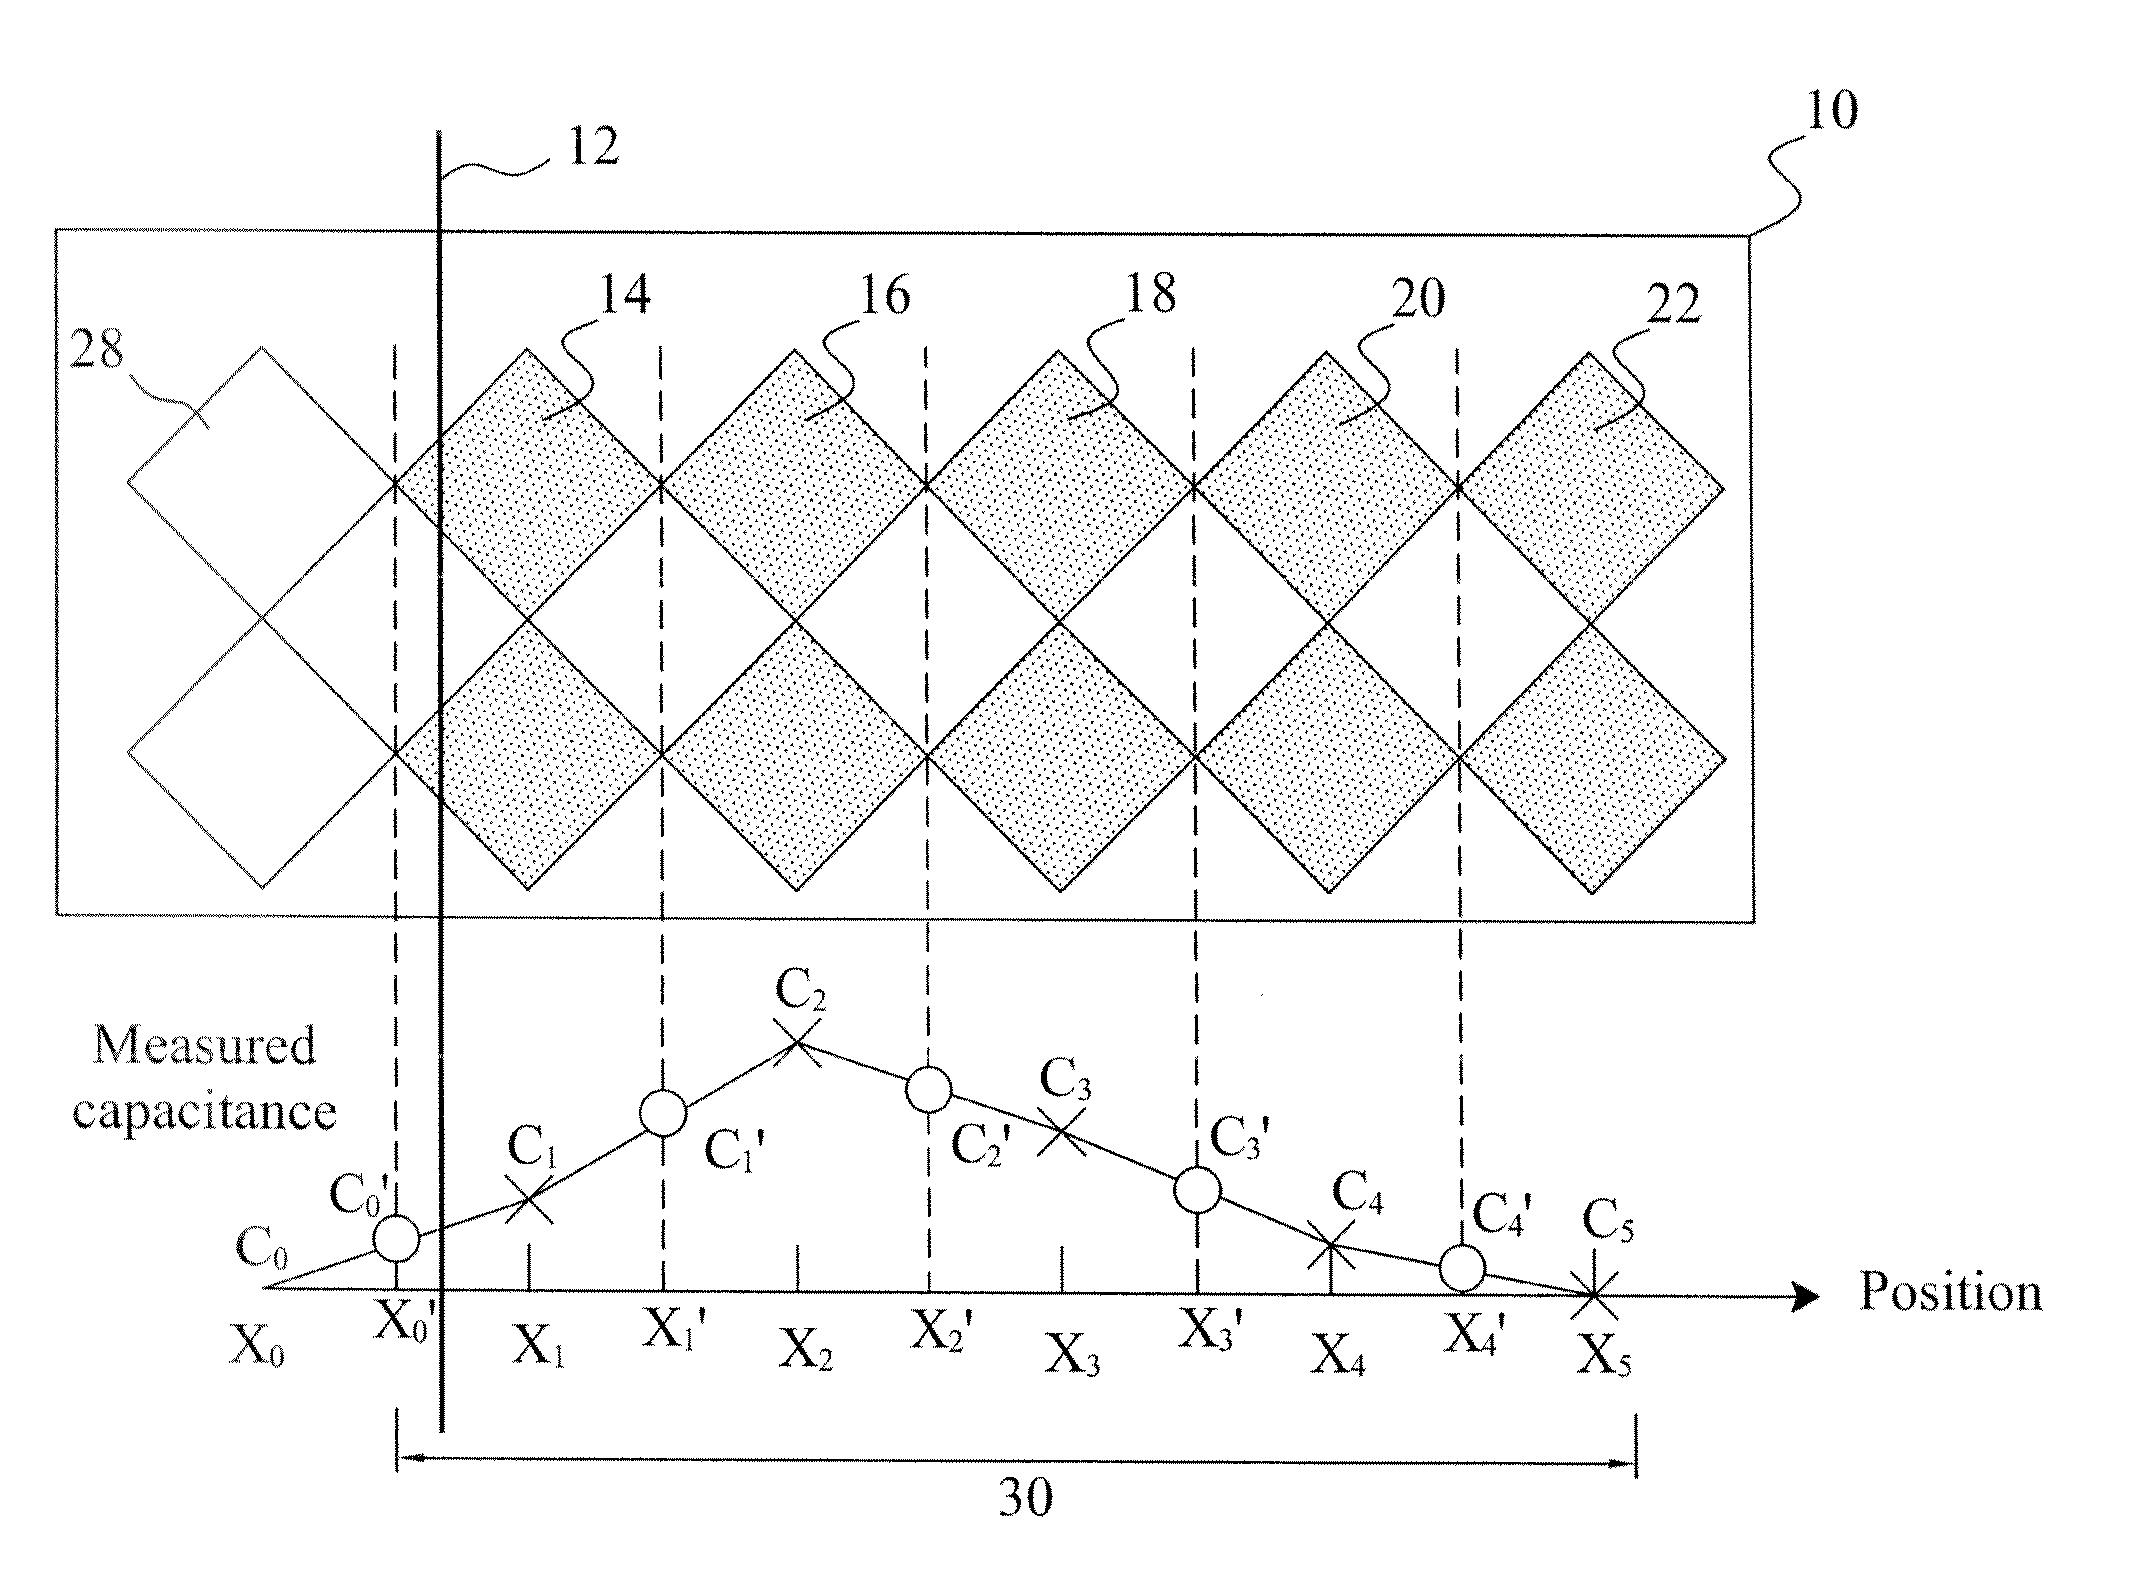 Boundary resolution improvement for a capacitive touch panel